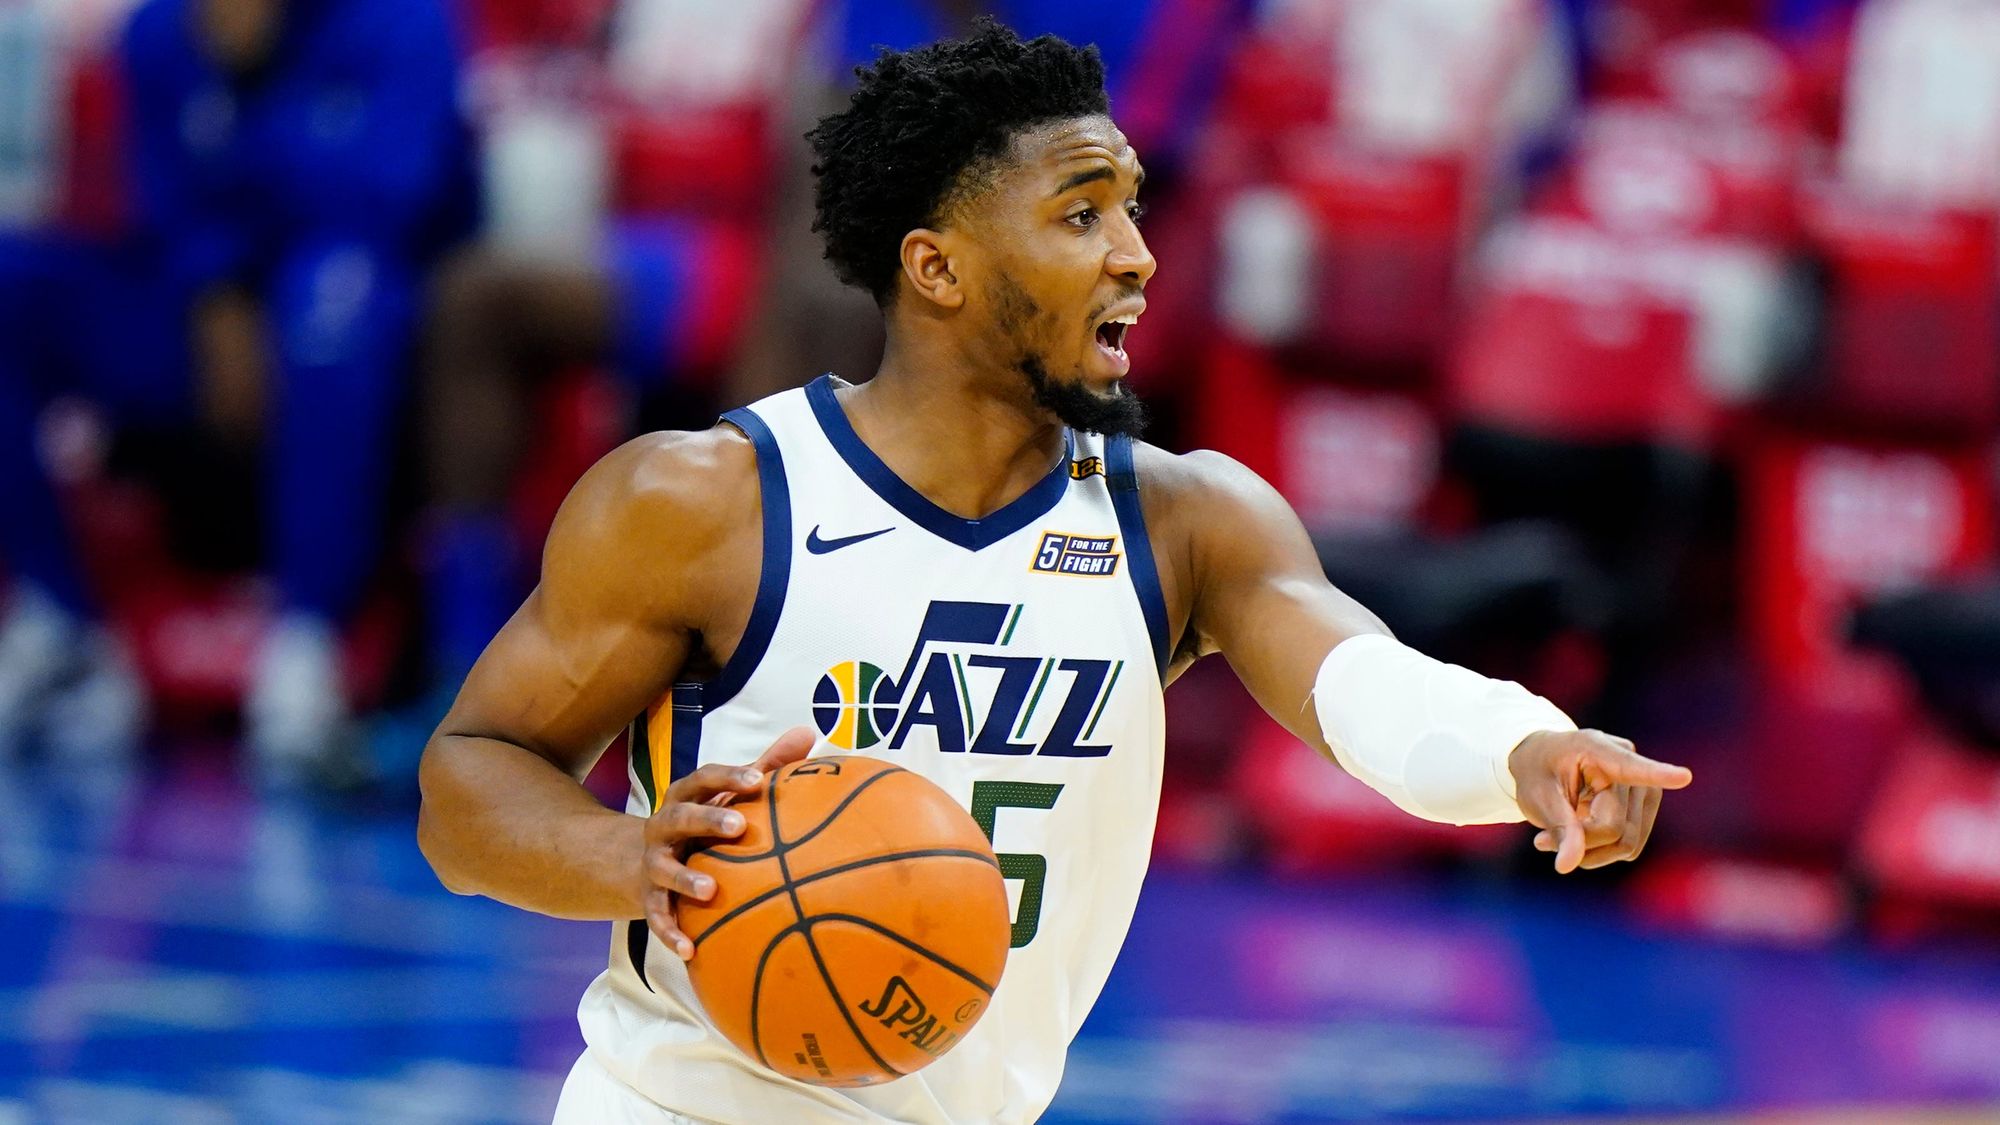 NBA MVP Race: Donovan Mitchell Should Be Considered If The Jazz Keeps Up The Wins